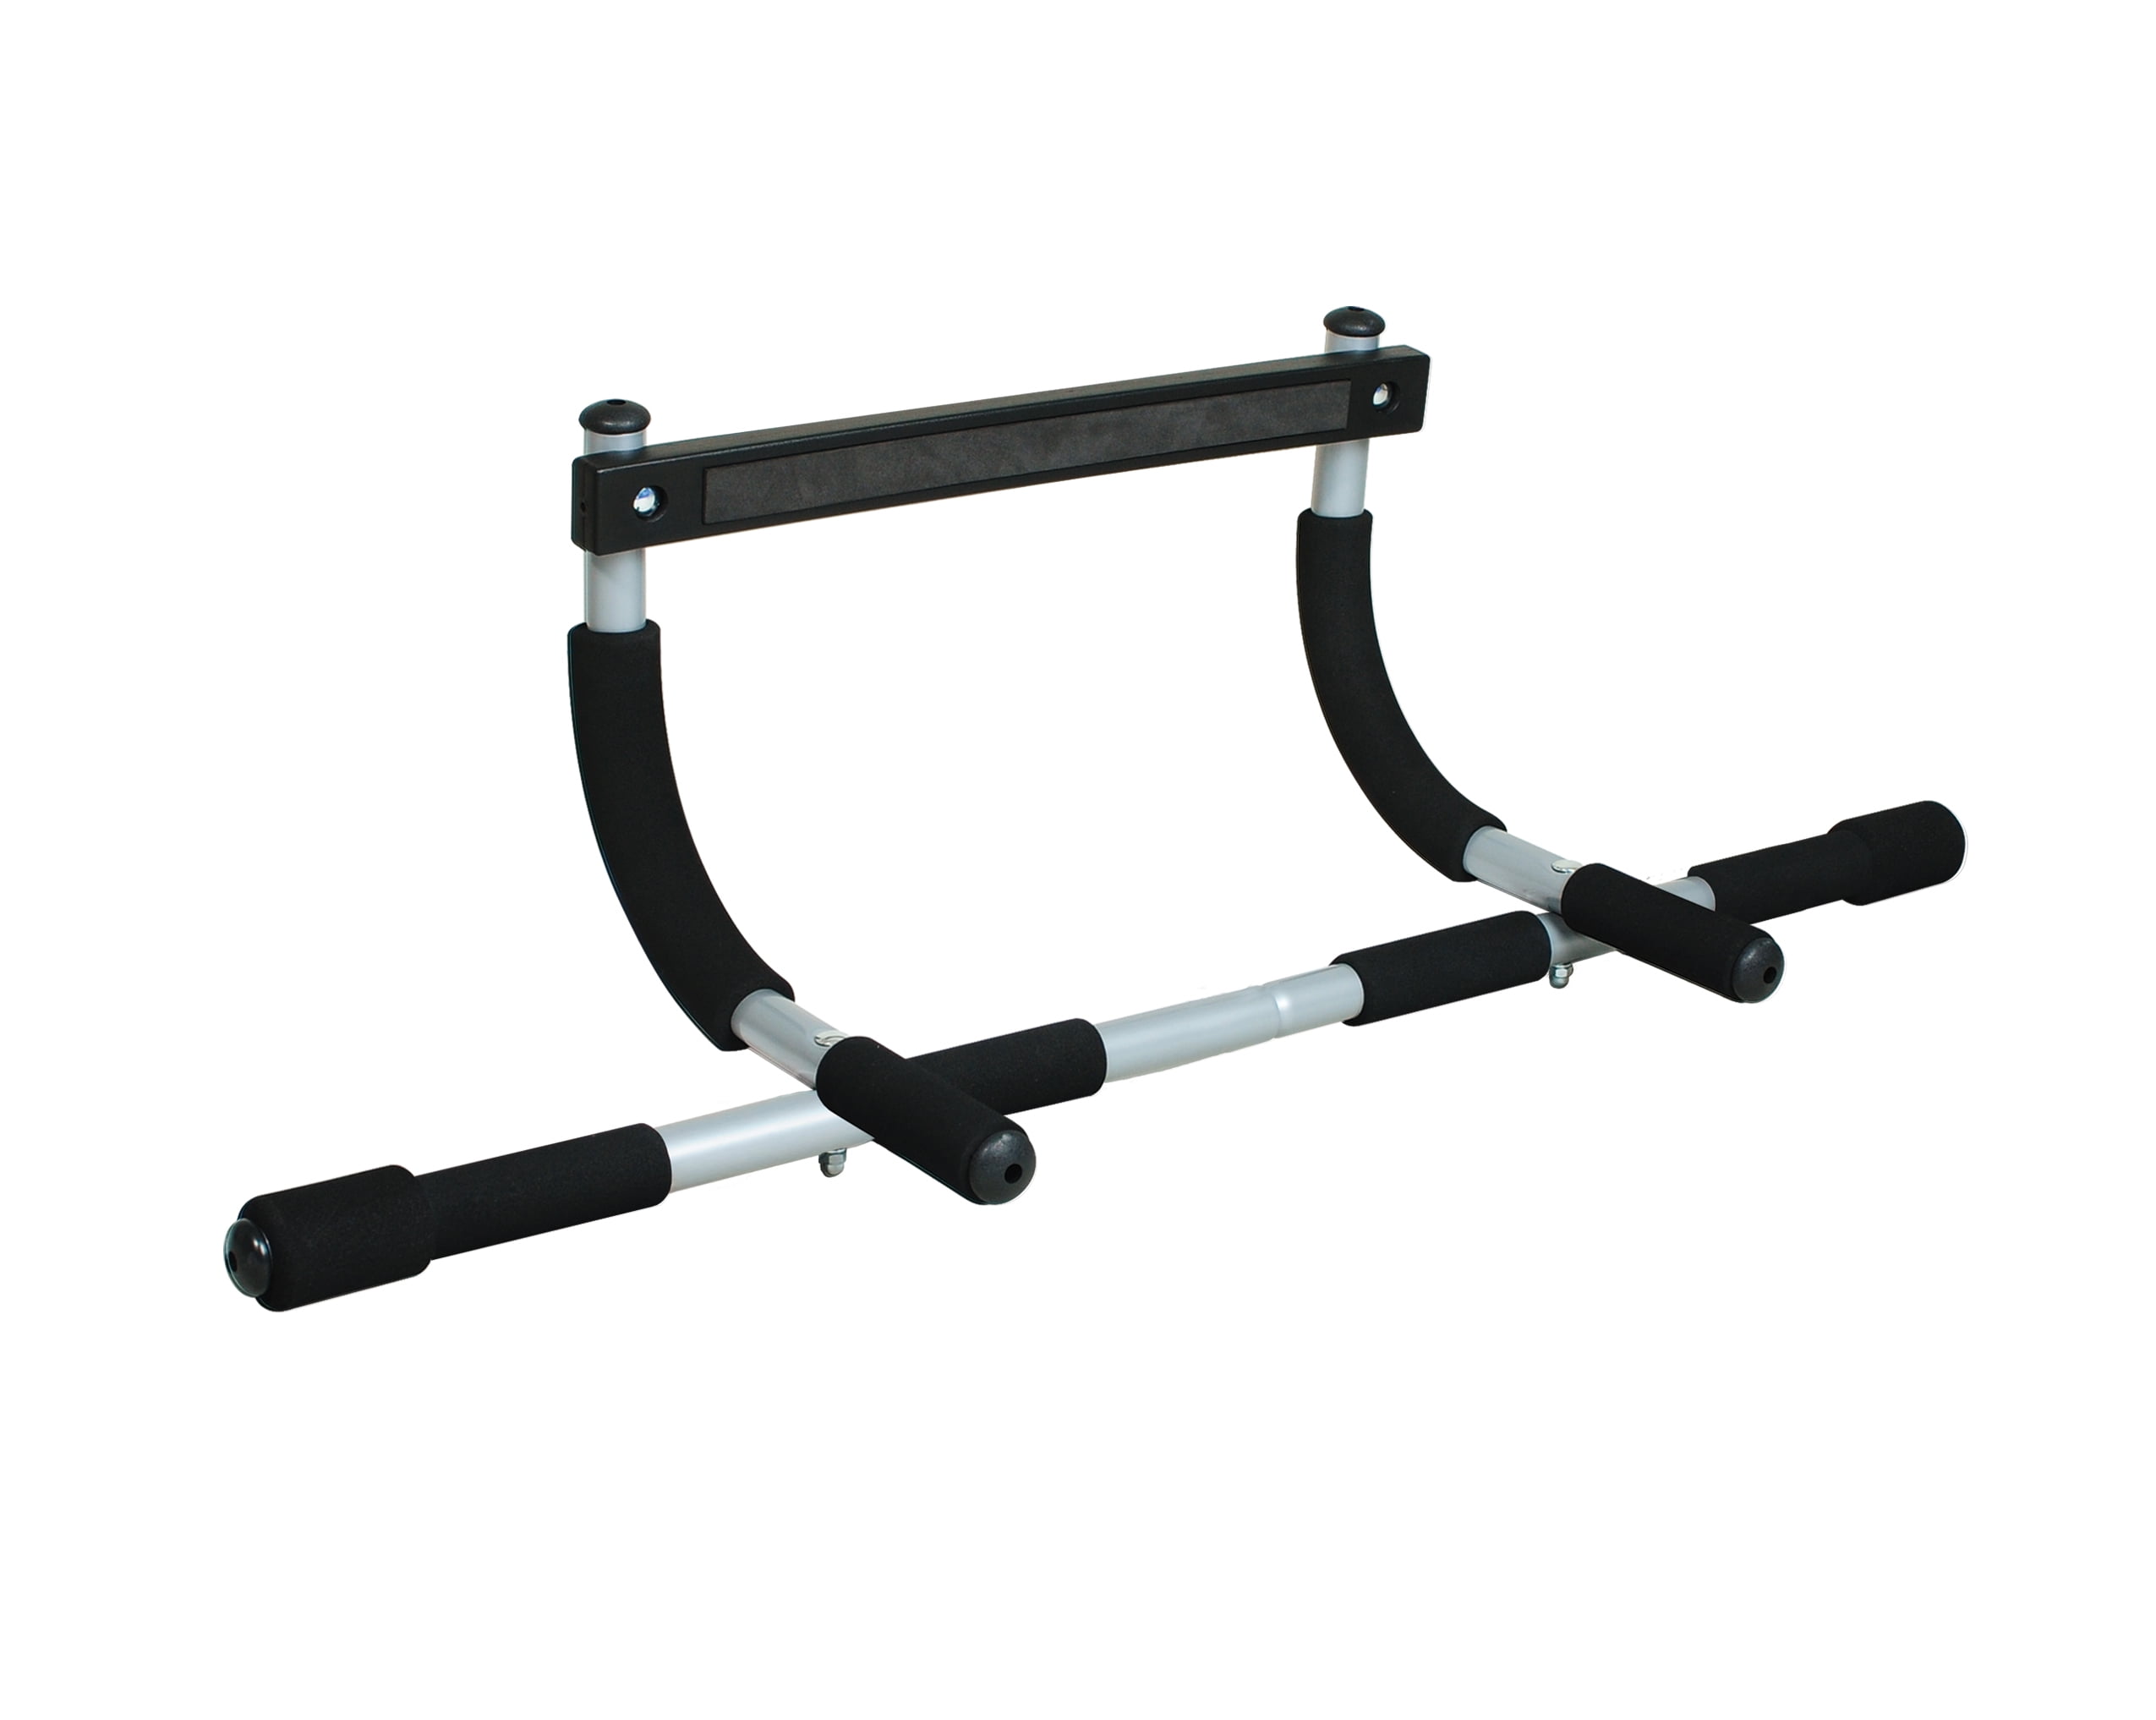 BOLANA Door Mounted Fitness Power Bar Gym Total Upper Body Workout Bar Push Up Stand